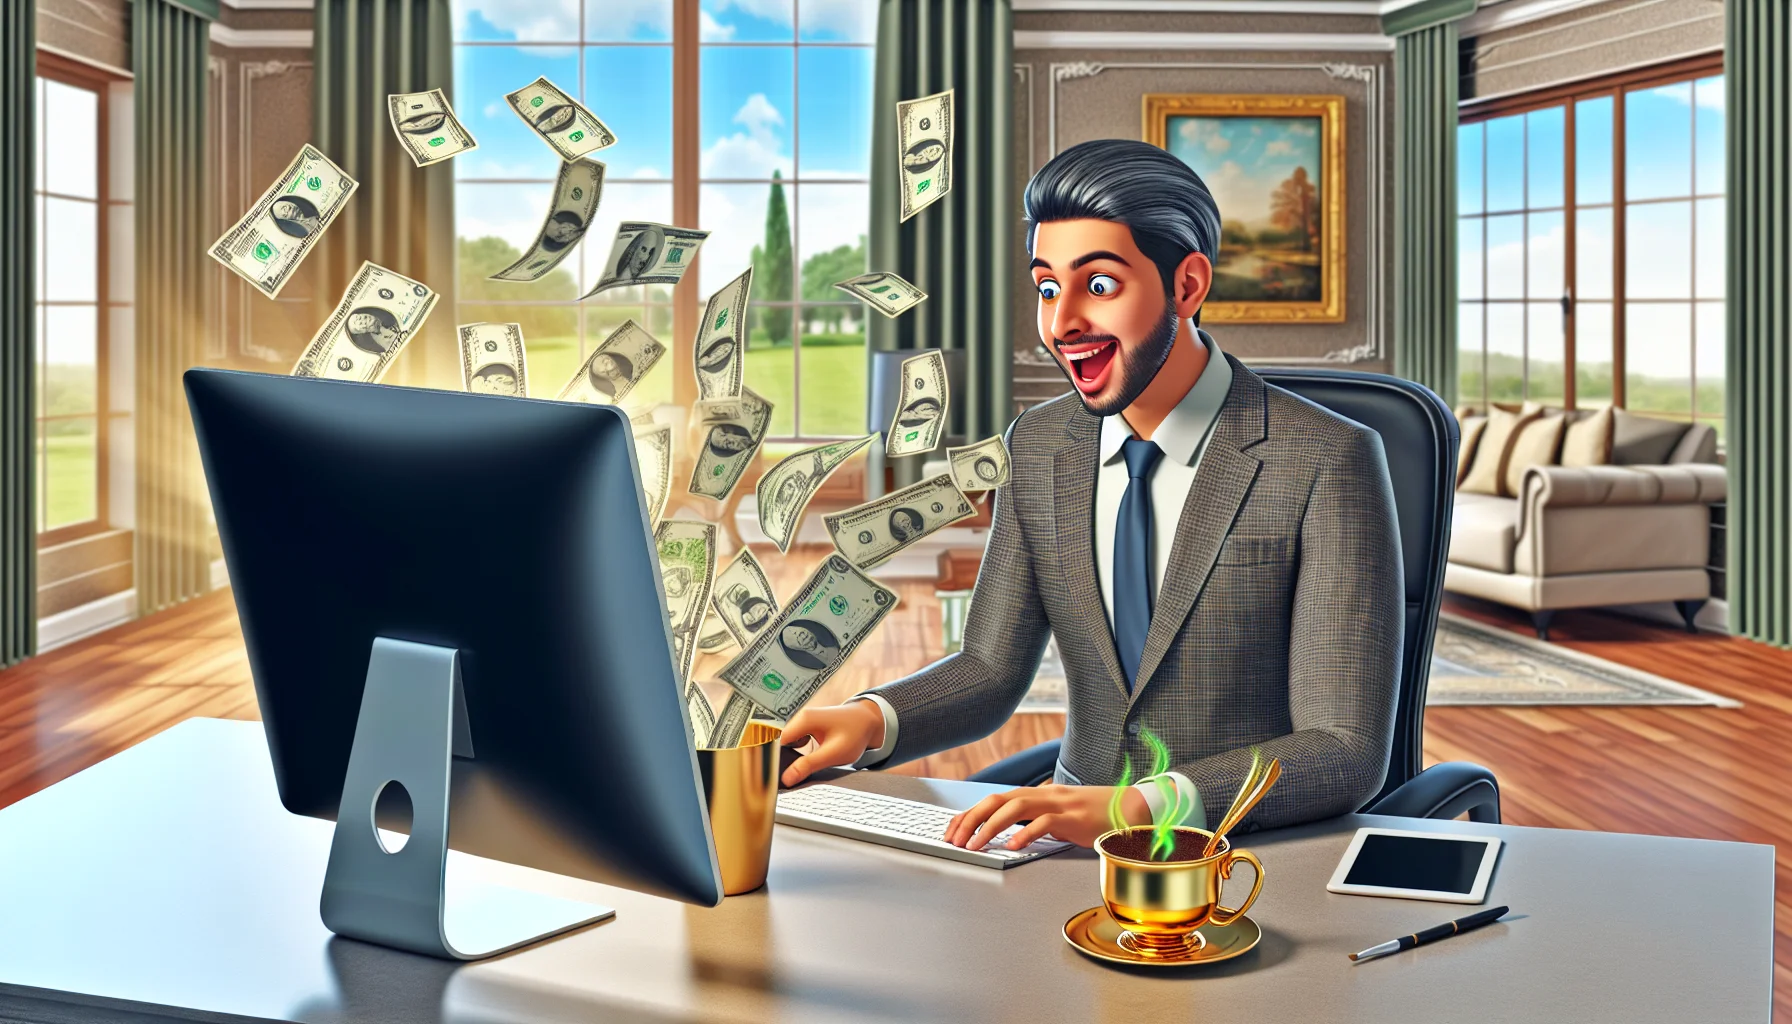 Create a humorous and realistic illustration involving a person of South Asian descent, male, who is representing an affiliate marketing company, sitting at a sleek modern desk. His eyes are wide with delight as he watches money symbols falling from his computer screen, an indicator of successful online earnings. The background reveals an indulgent home office with lavish decor and a large picturesque window depicting a sunny day. On the desk, next to the computer, there's a gold cup of coffee radiating a tempting aroma.